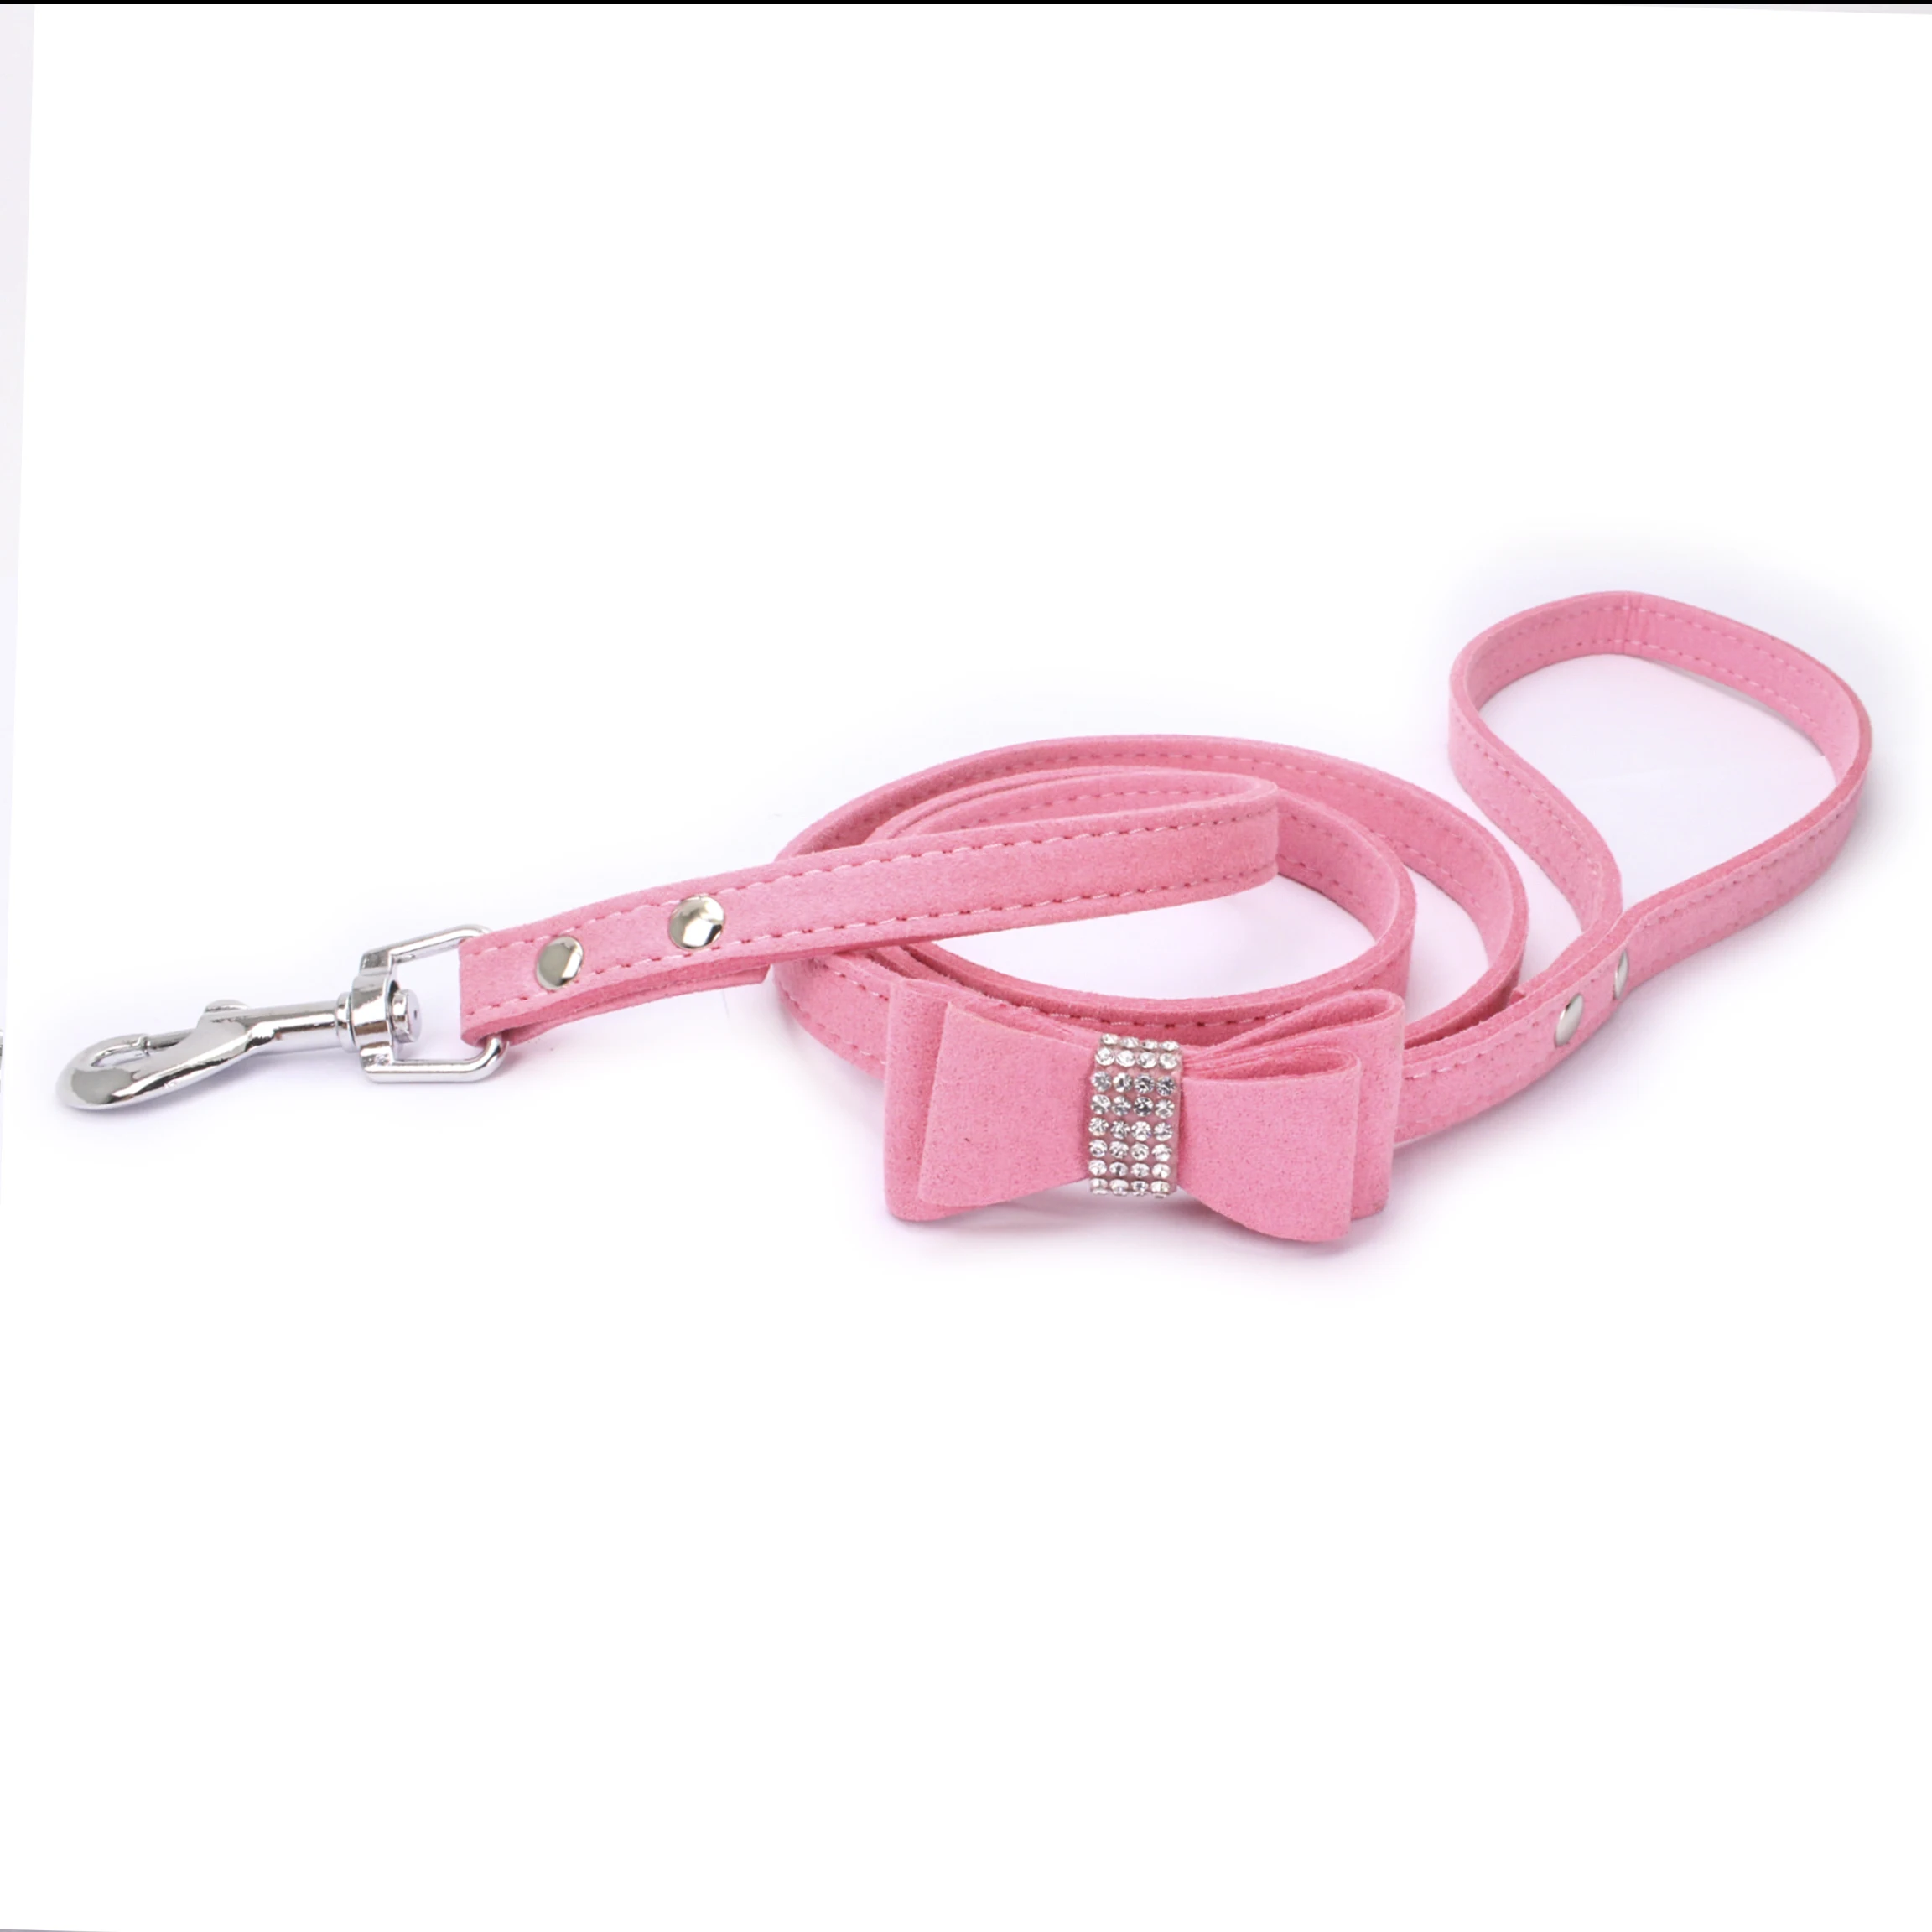 Pet Harness Leash With Rhinestone Bling Crystal Adjustable Chest Strap Soft Suede Bow Leather High Quality Drop Shipping